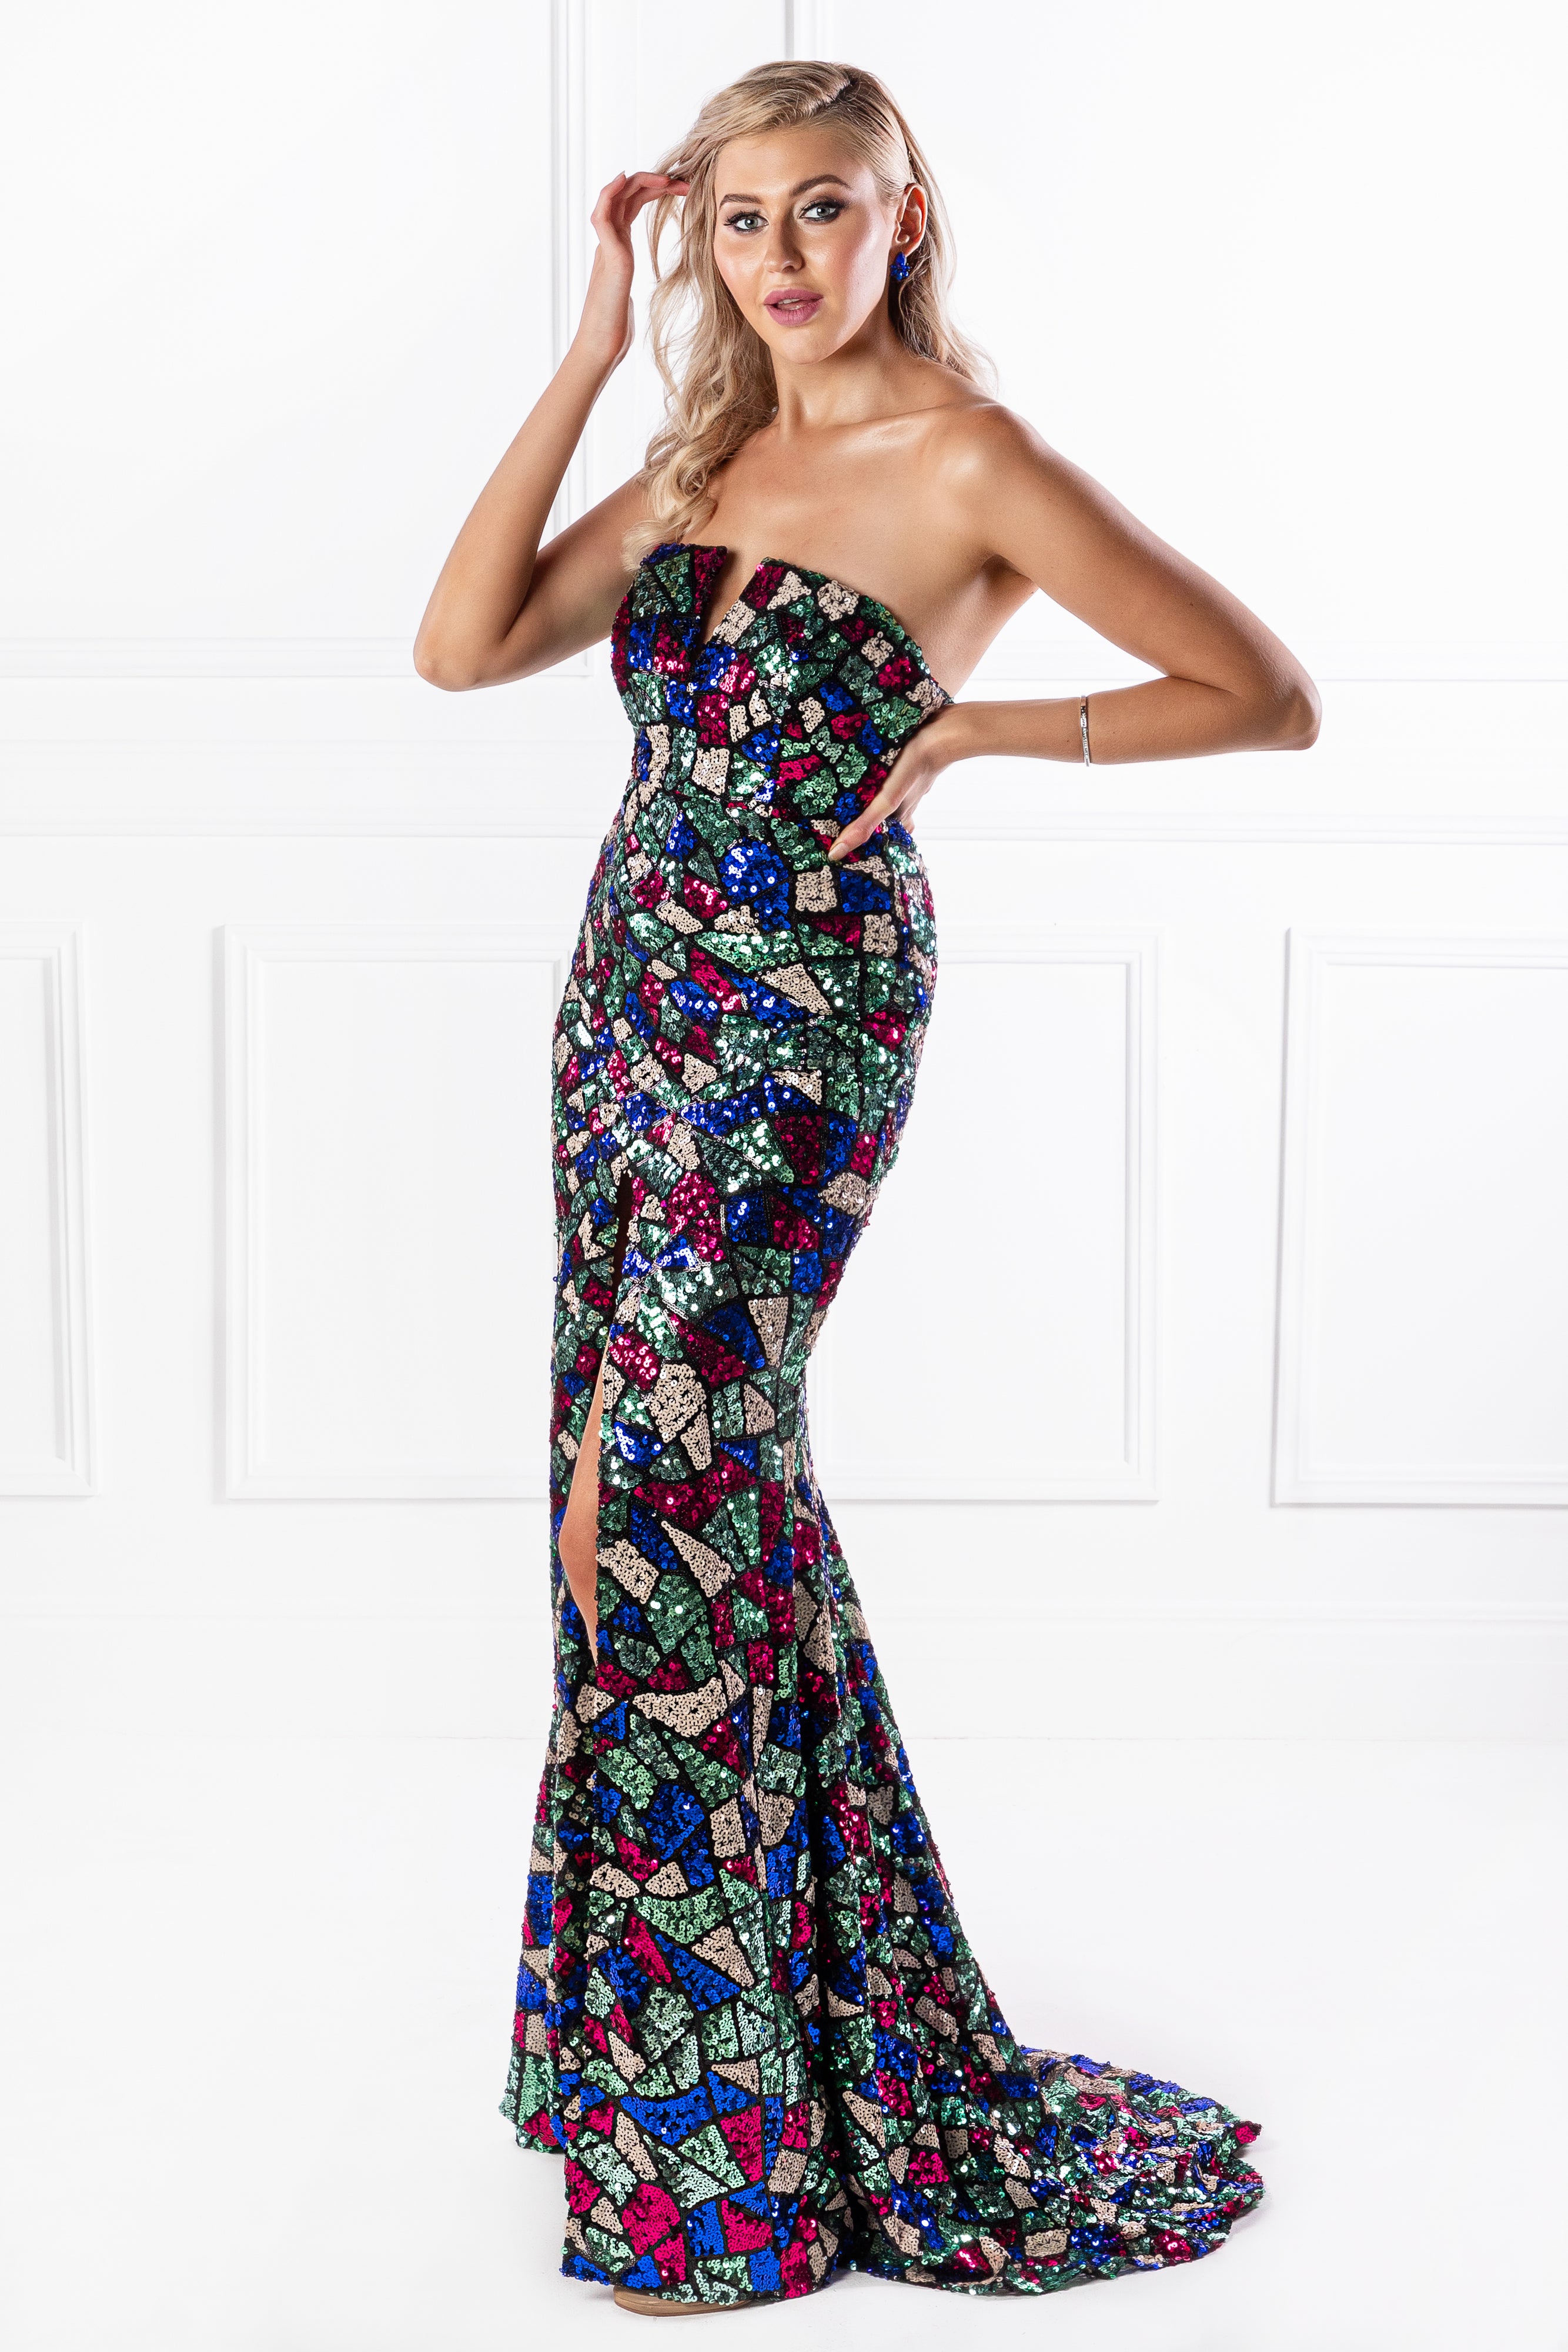 Honey Couture ELTON Strapless Mermaid Evening Gown Dress {vendor} AfterPay Humm ZipPay LayBuy Sezzle